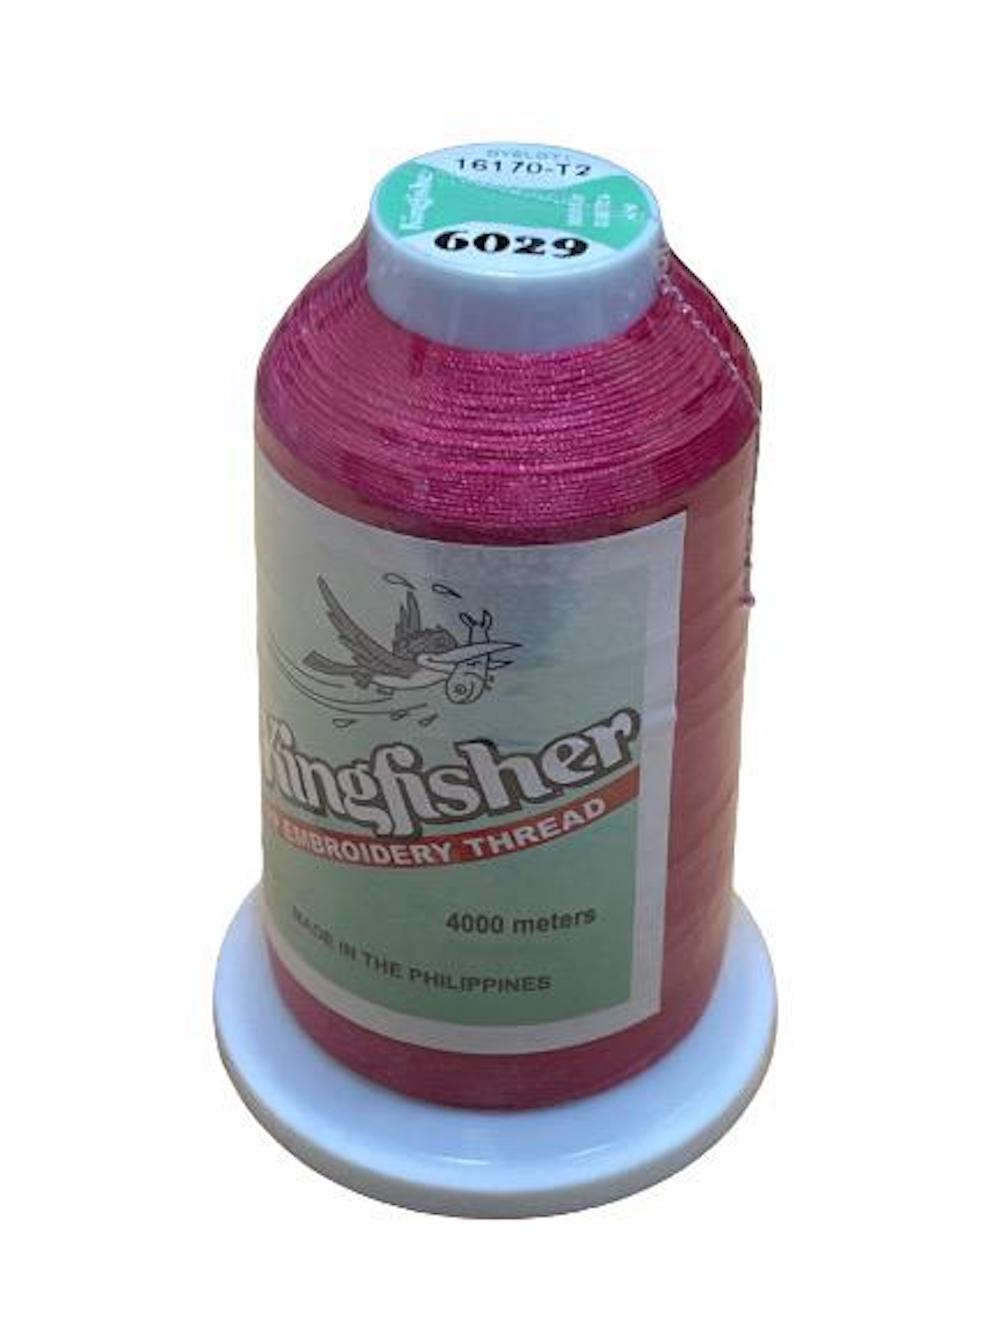 King Fisher Embroidery Thread 4000m 6029 - MY SEWING MALL